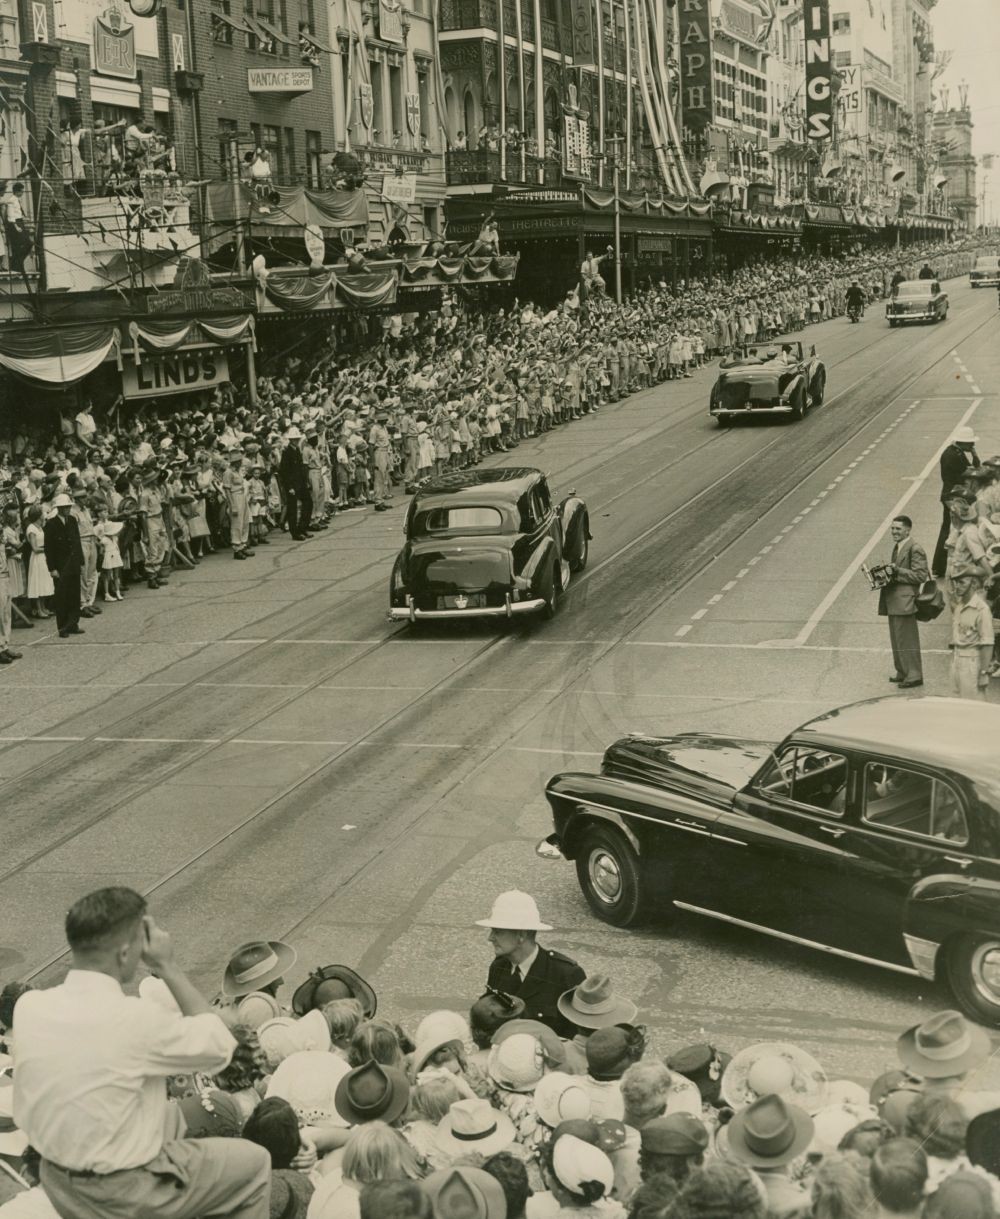 Large crowds line the streets as the royal entourage drives past, Queensland, 1954